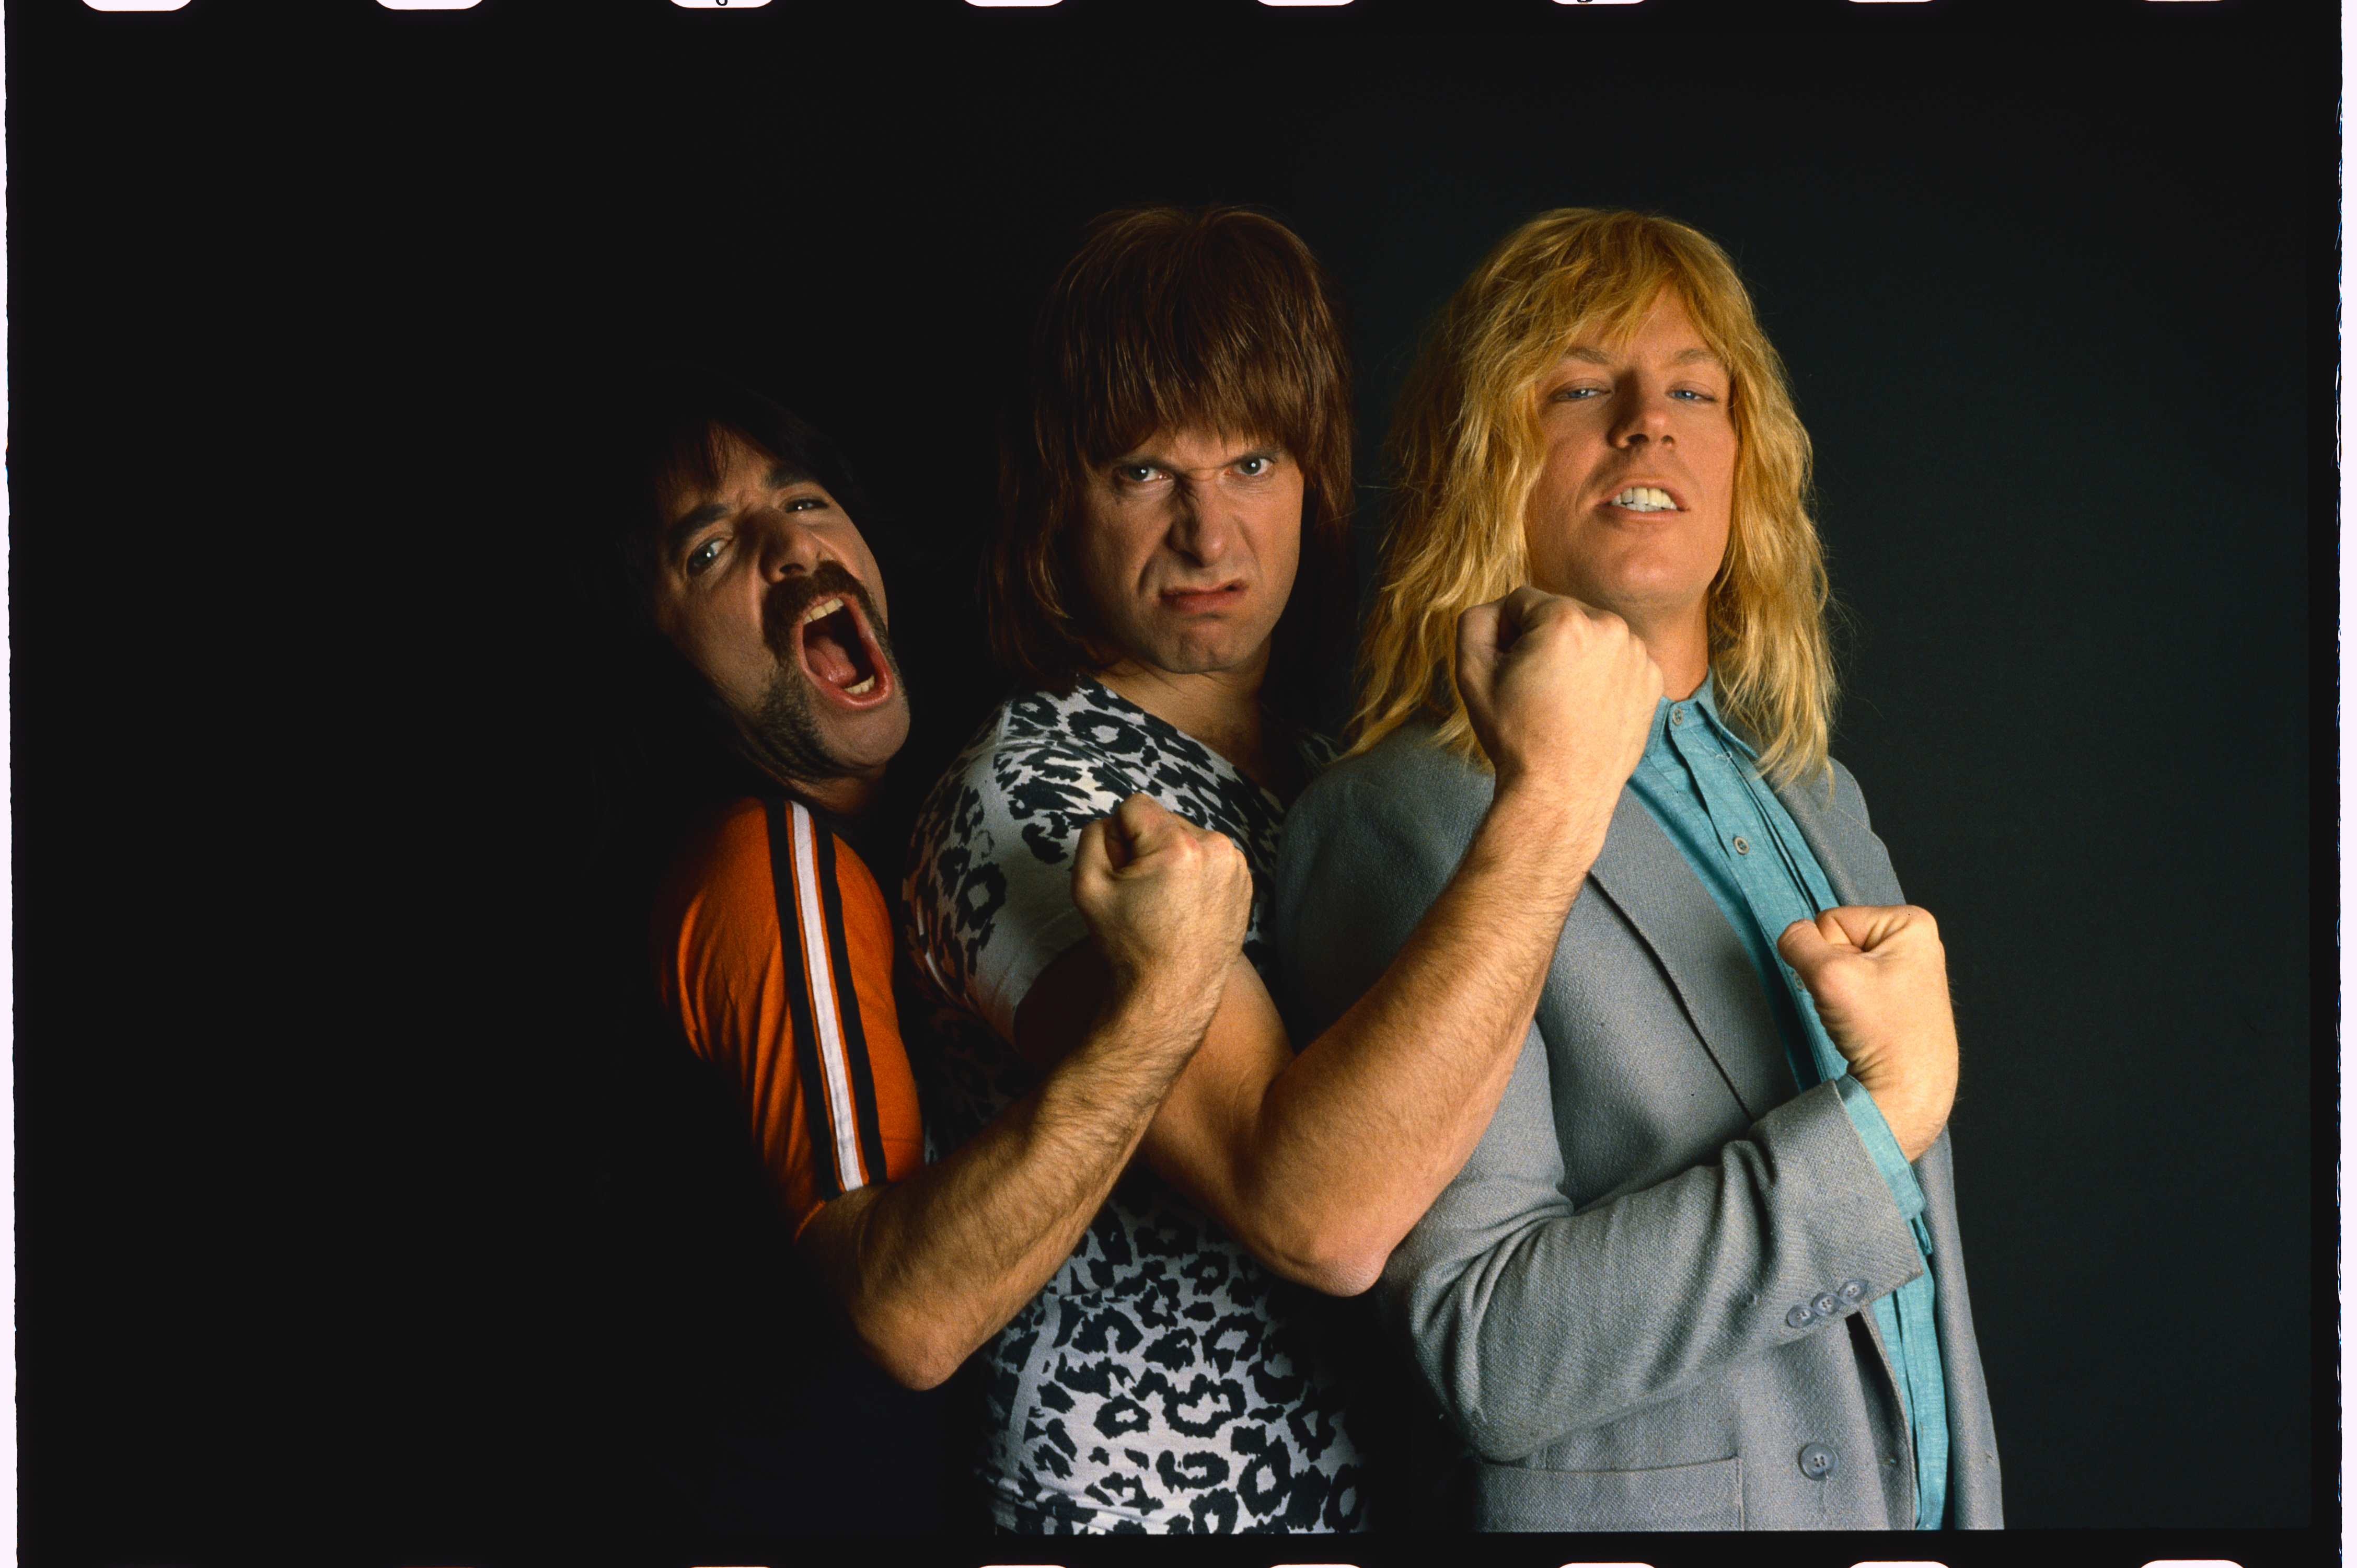 Cast of “Spinal Tap” to Reunite for Democratic Fundraiser